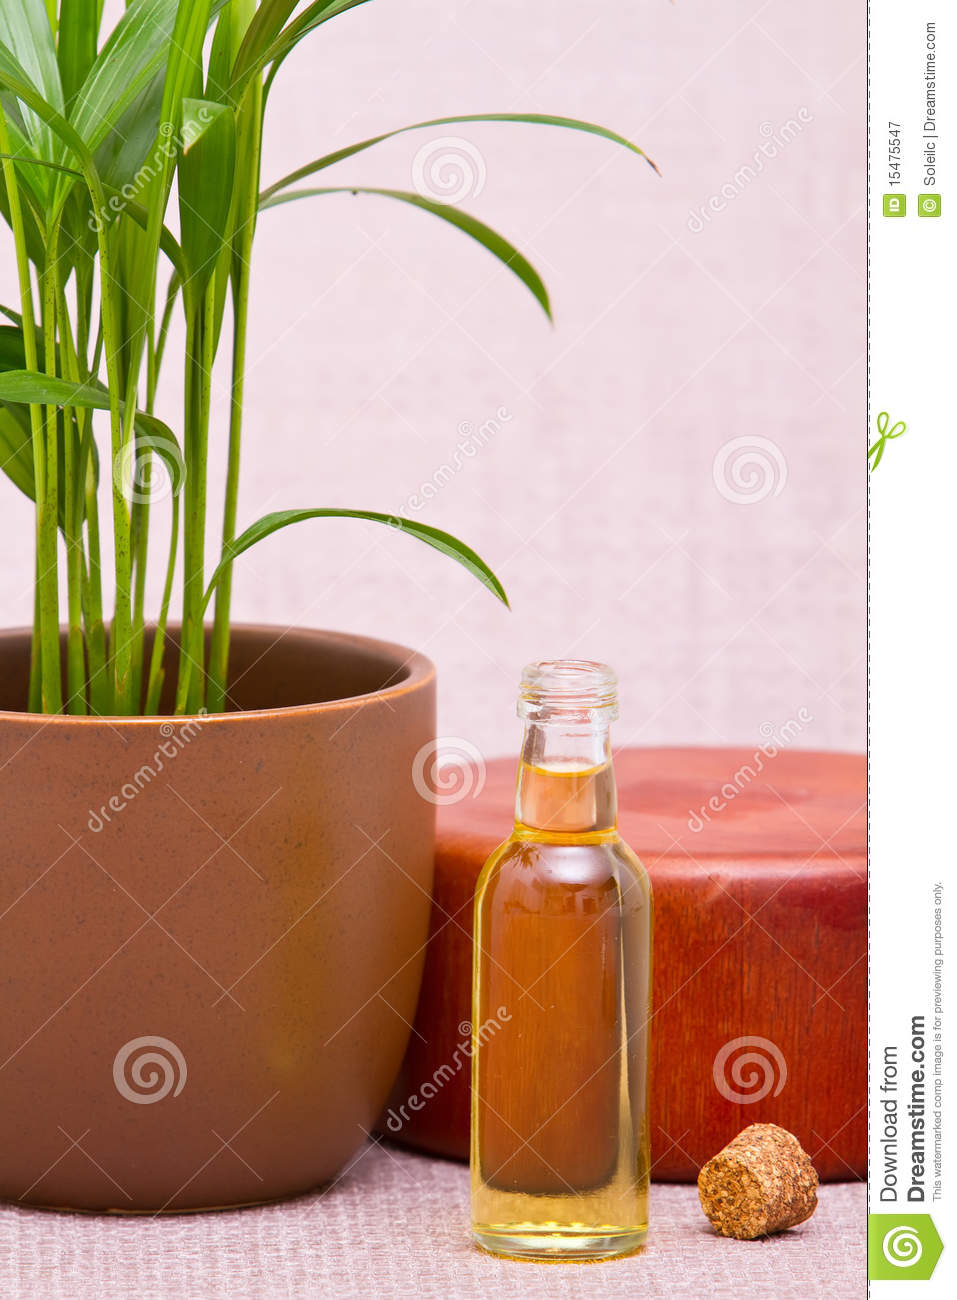 Essential Oils For Massage Royalty Free Stock Photography   Image